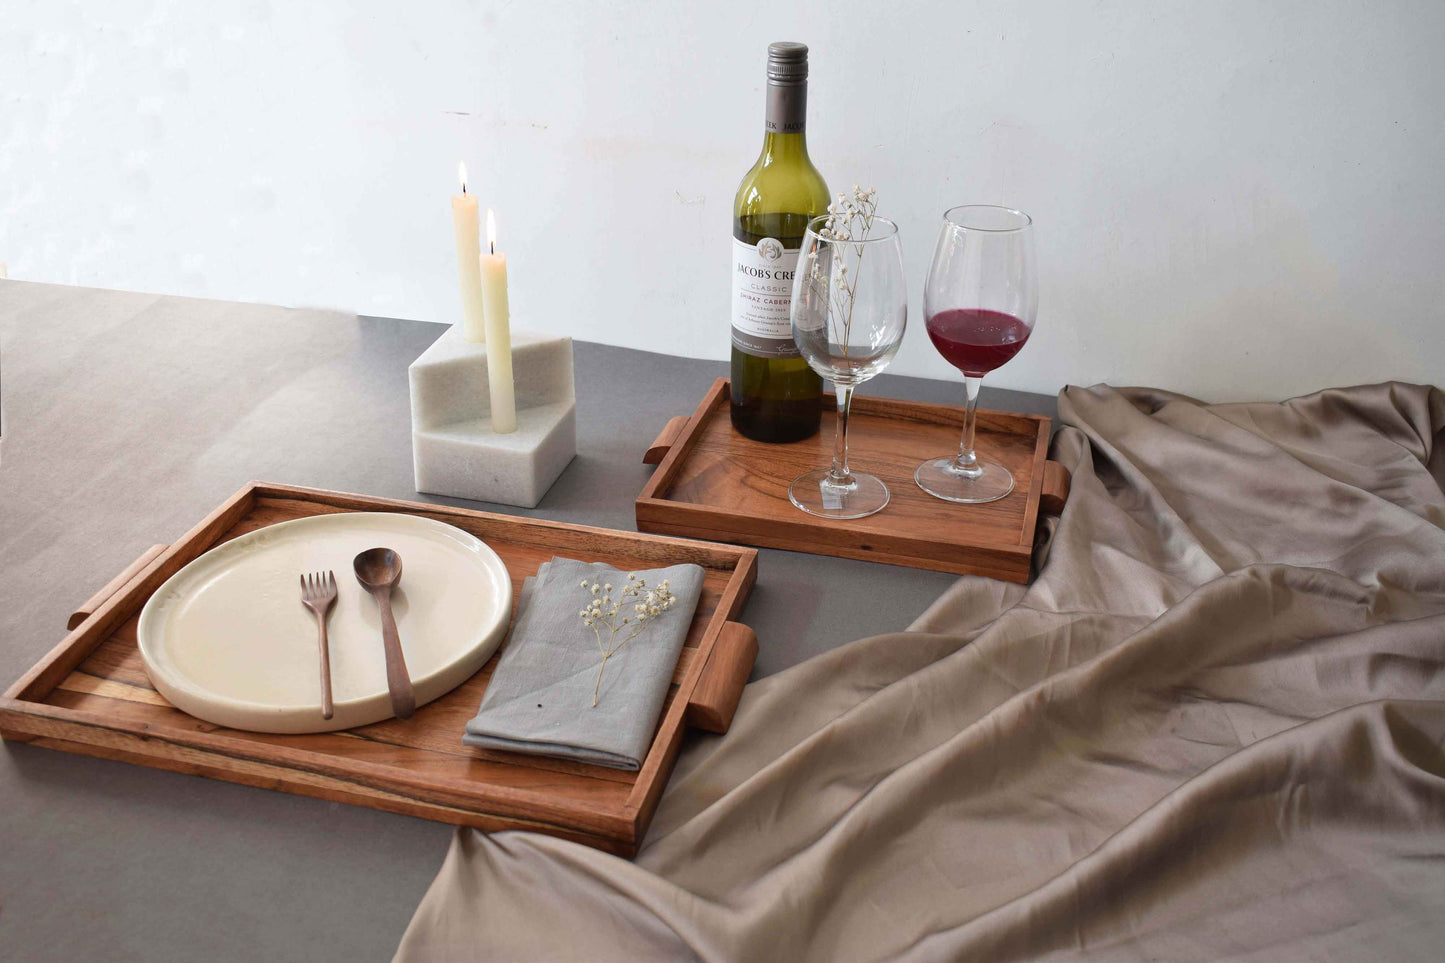 house warming gifting idea, wooden serving tray set